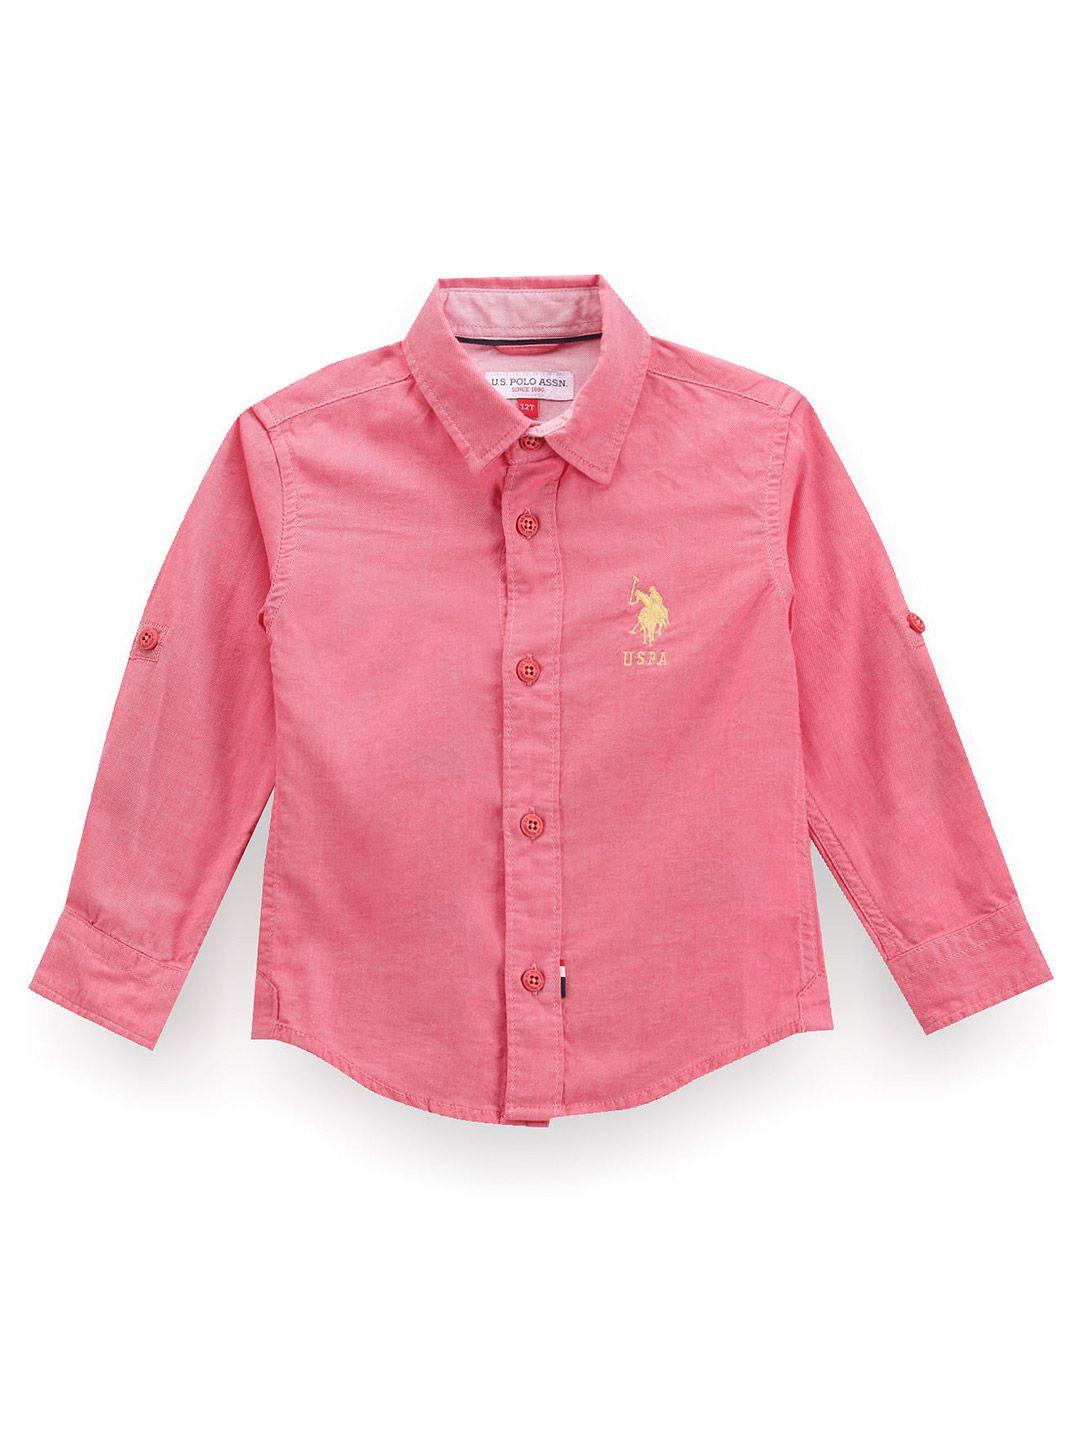 u.s. polo assn. kids boys classic roll-up sleeves twill pure cotton casual shirt